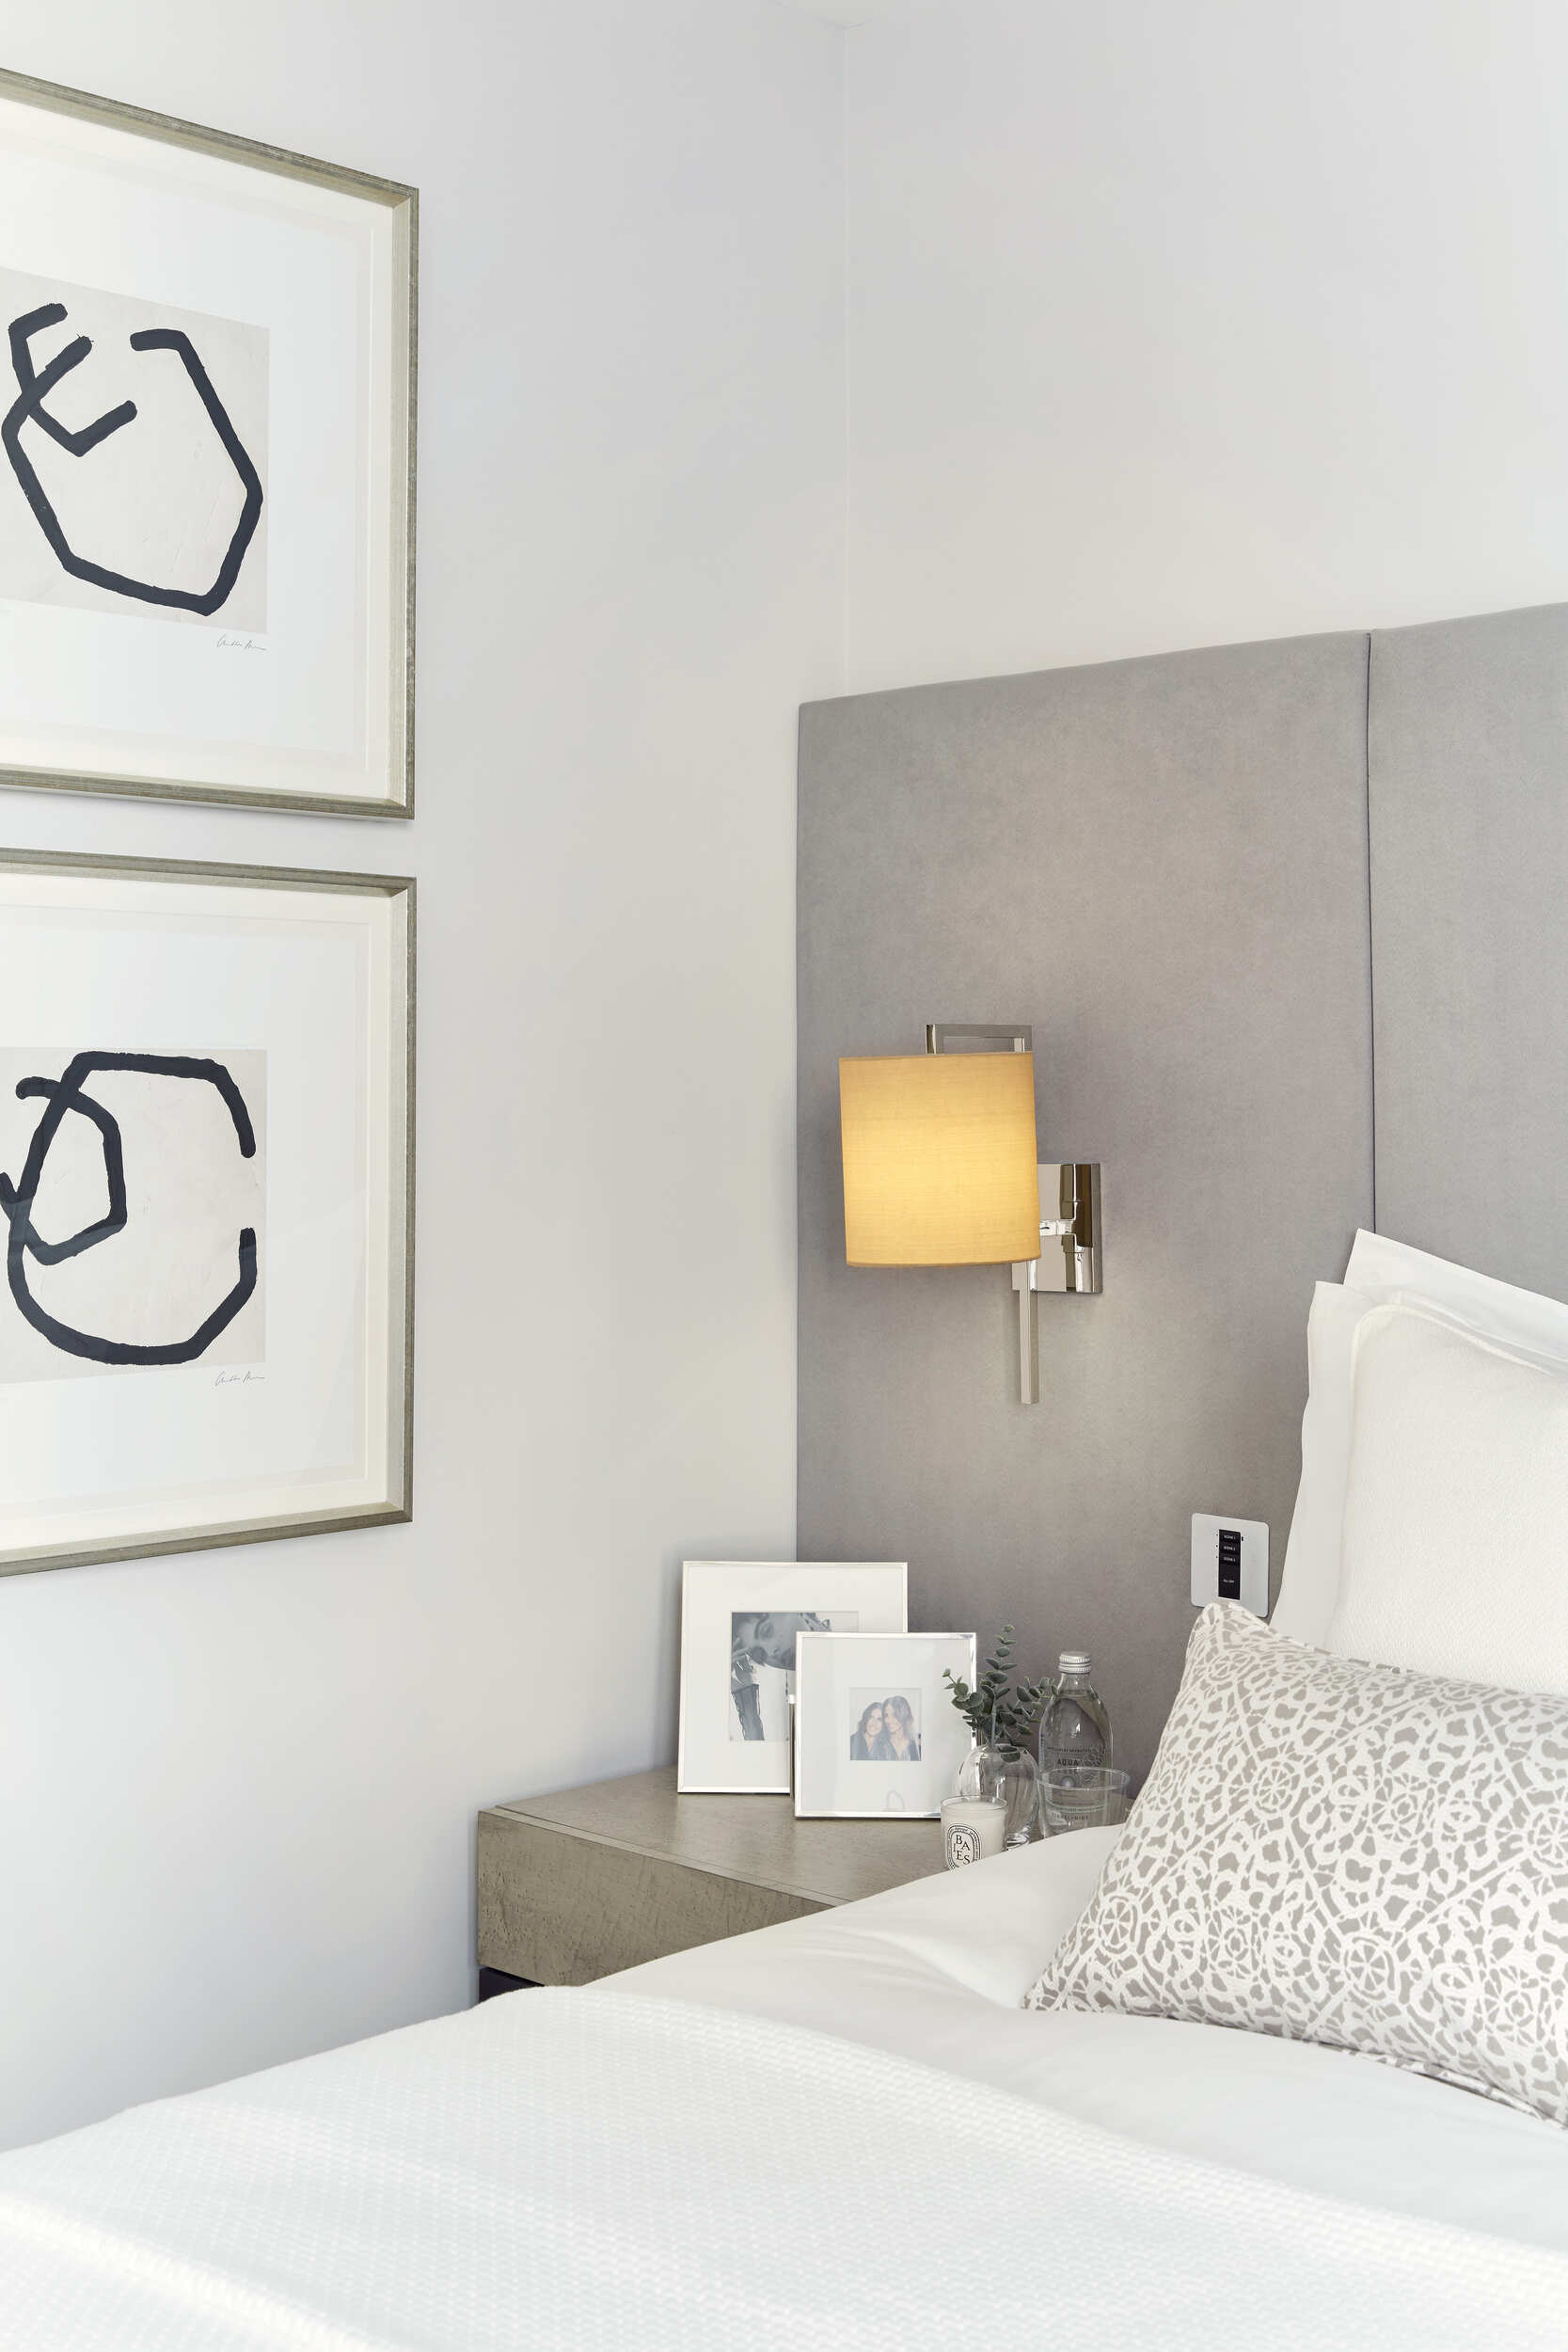 Bedroom features two wall hung minimalist art pieces